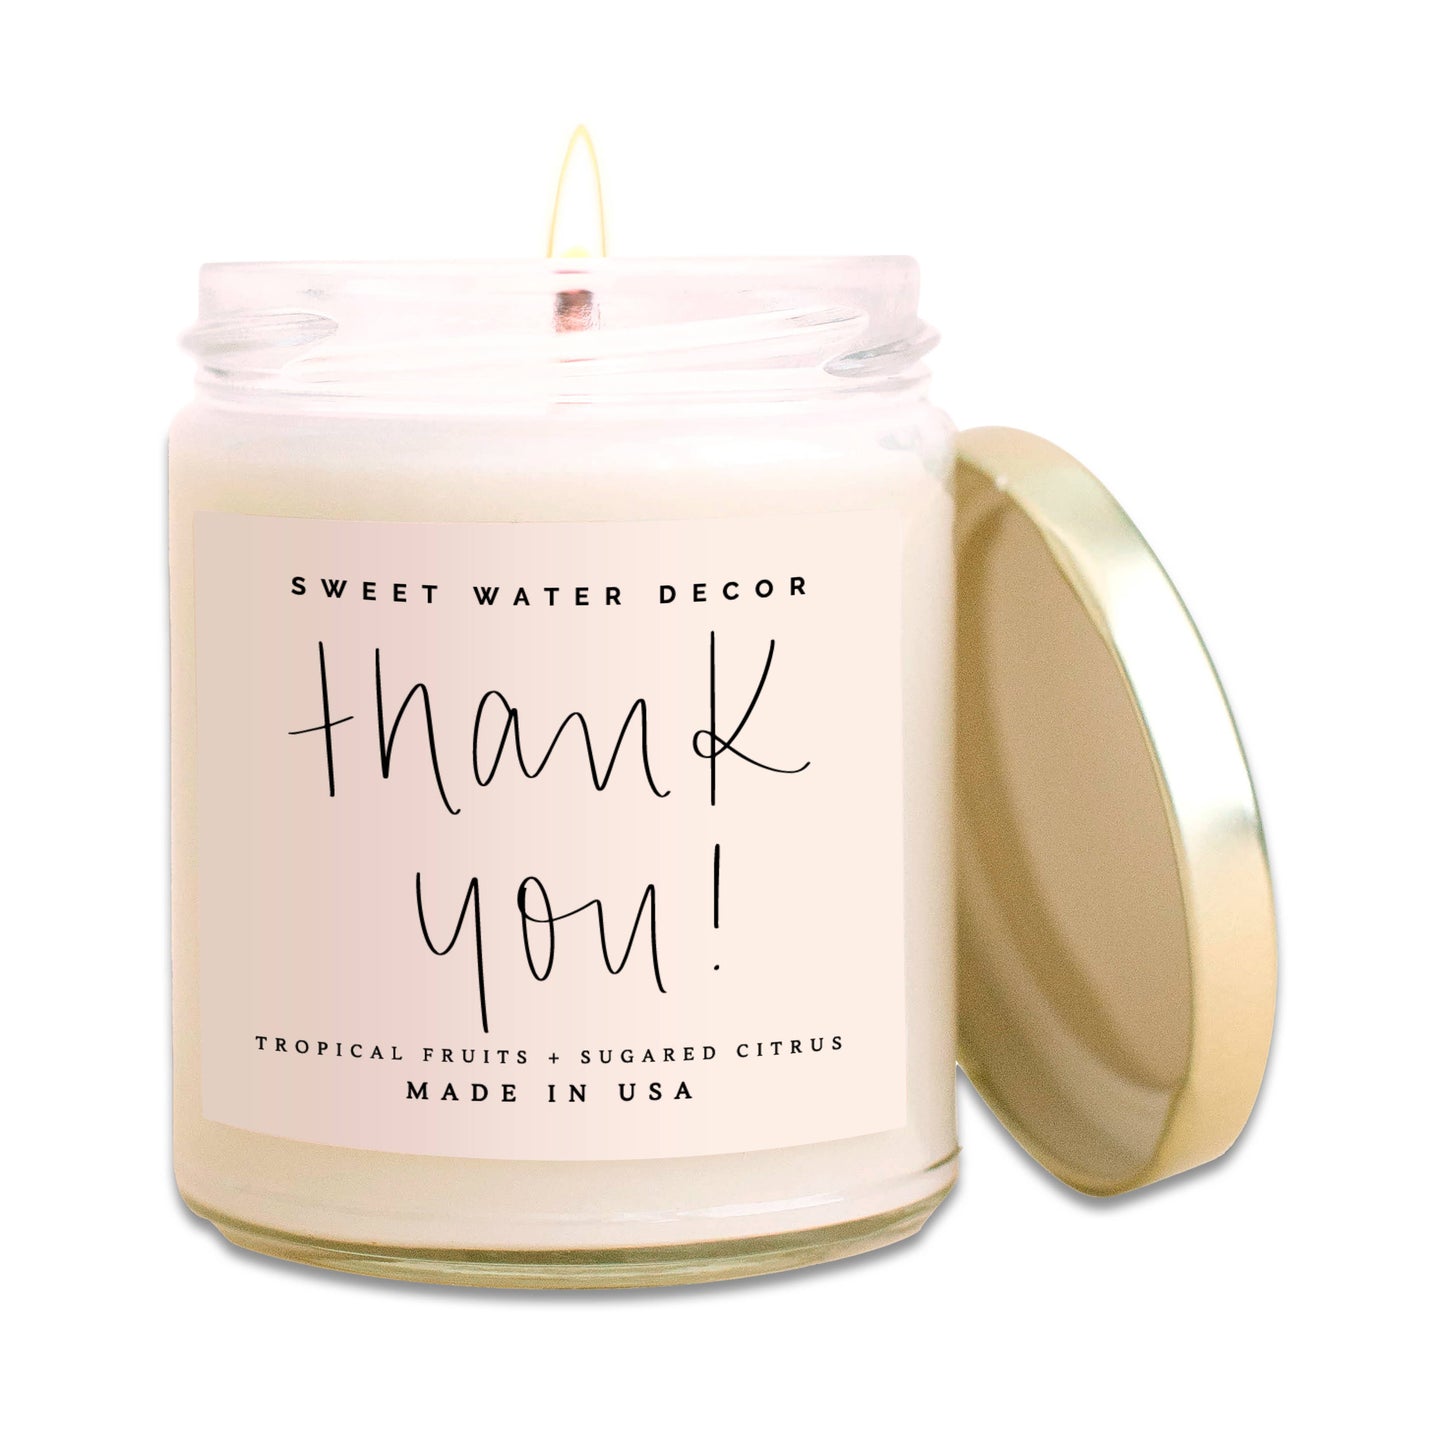 Sweet Water Decor - Thank You! Soy Candle - Clear Jar - 9 oz